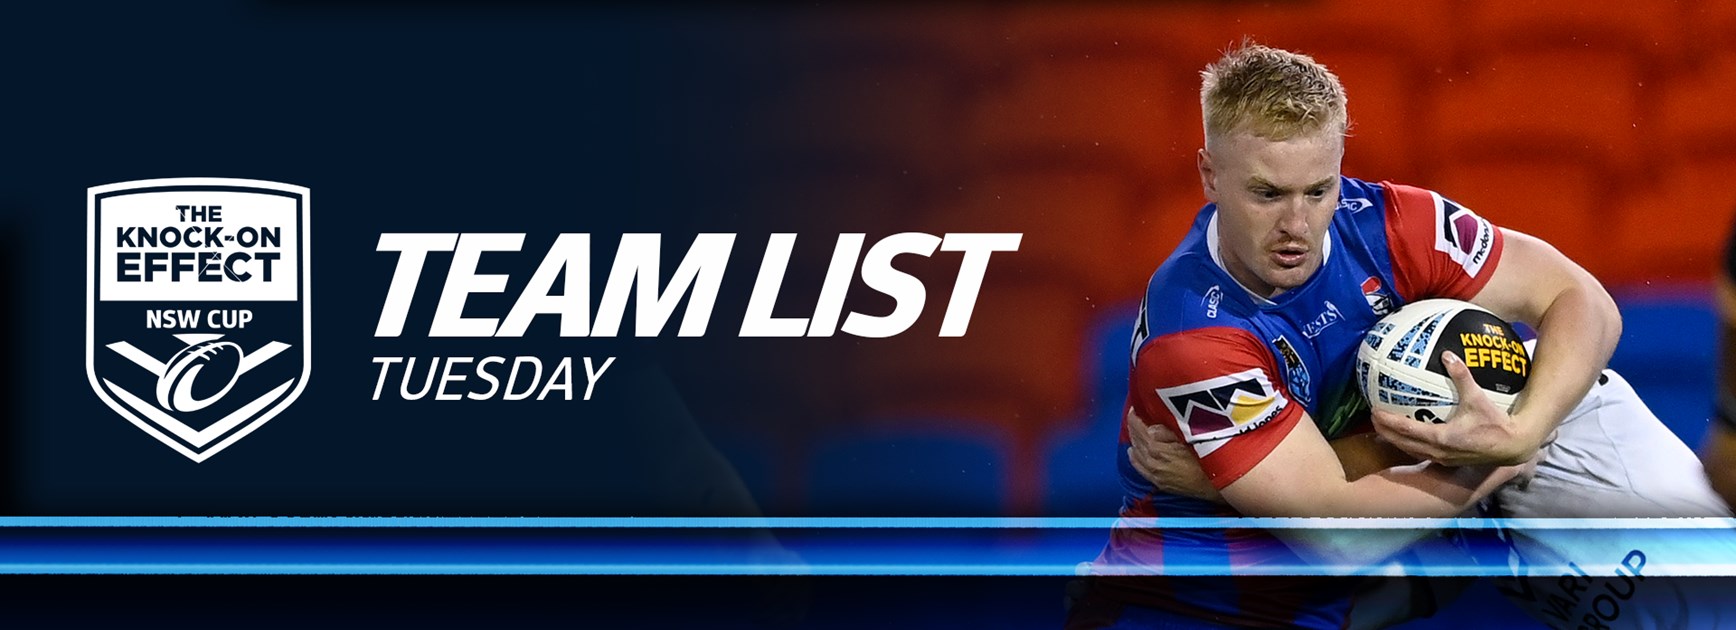 Team List Tuesday | The Knock-On Effect NSW Cup - Round 14